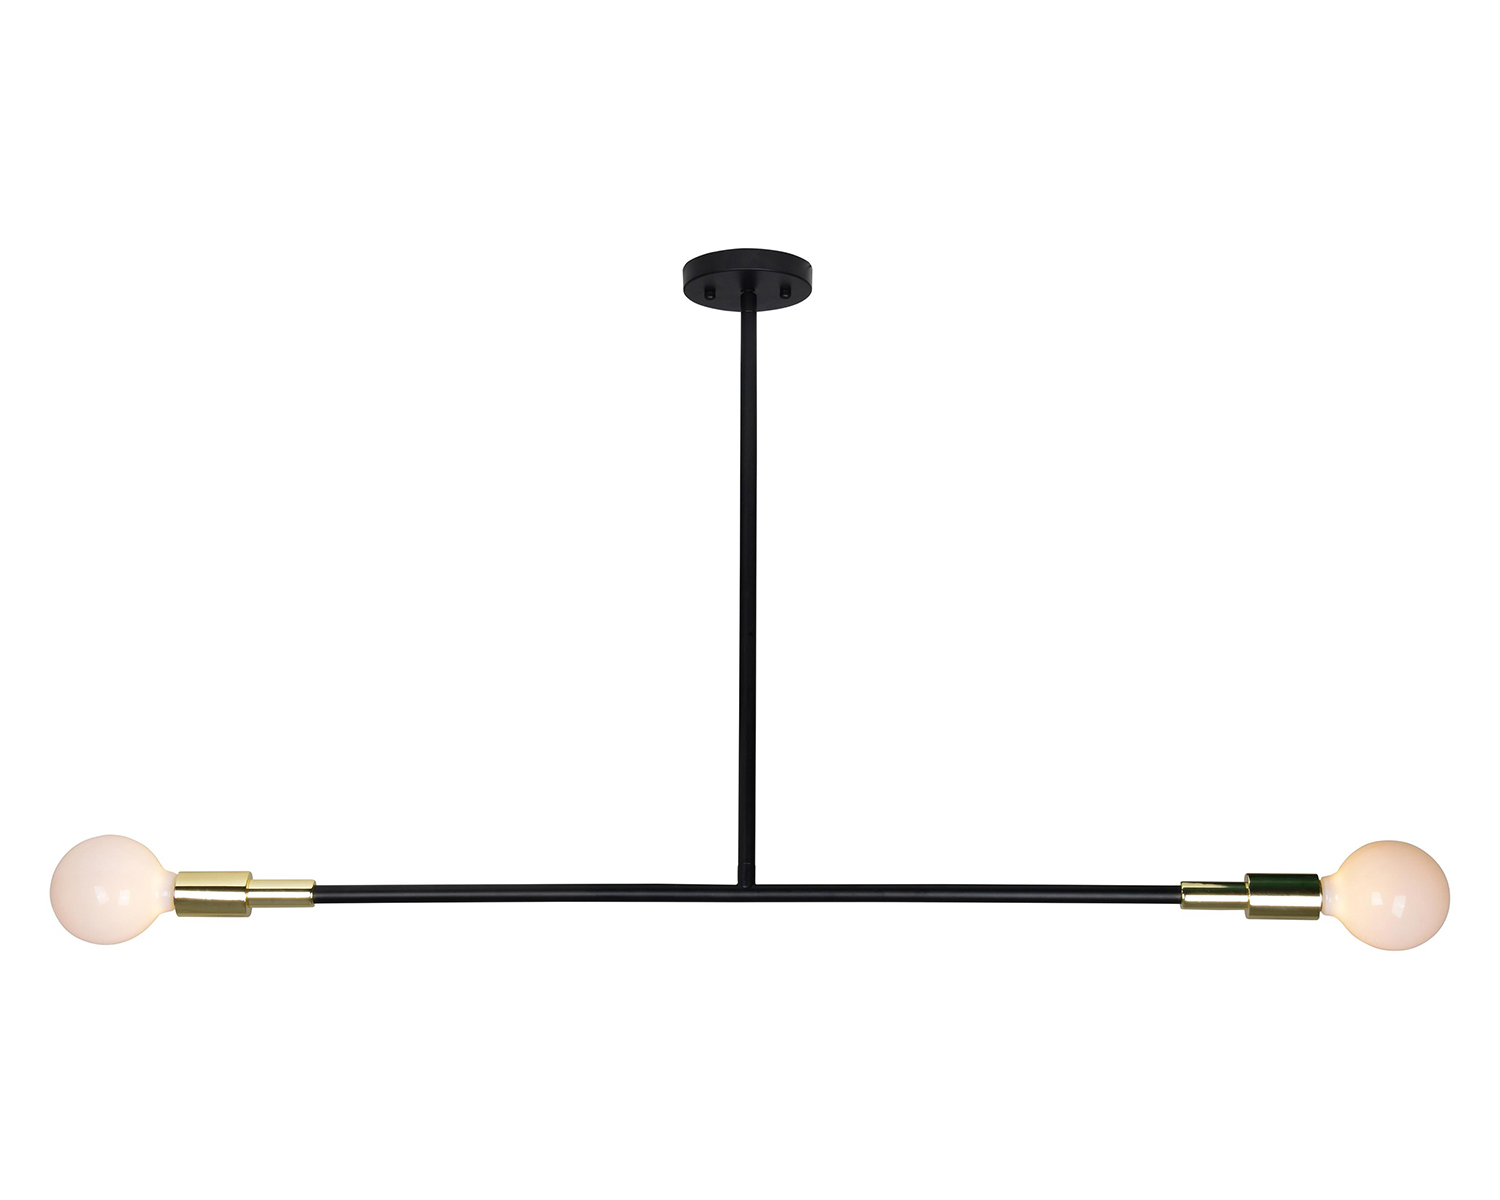 Ren-Wil Pairs Ceiling Fixture - Matte Black/Polished Brass